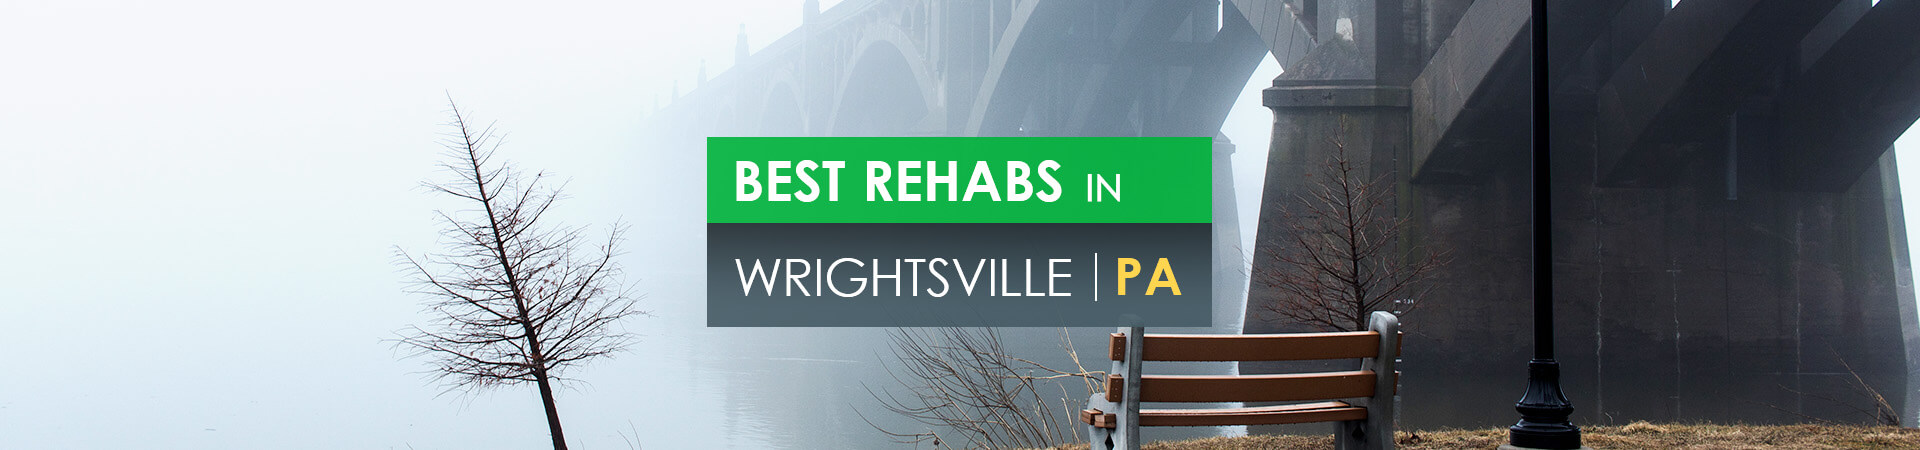 Best rehabs in Wrightsville, PA